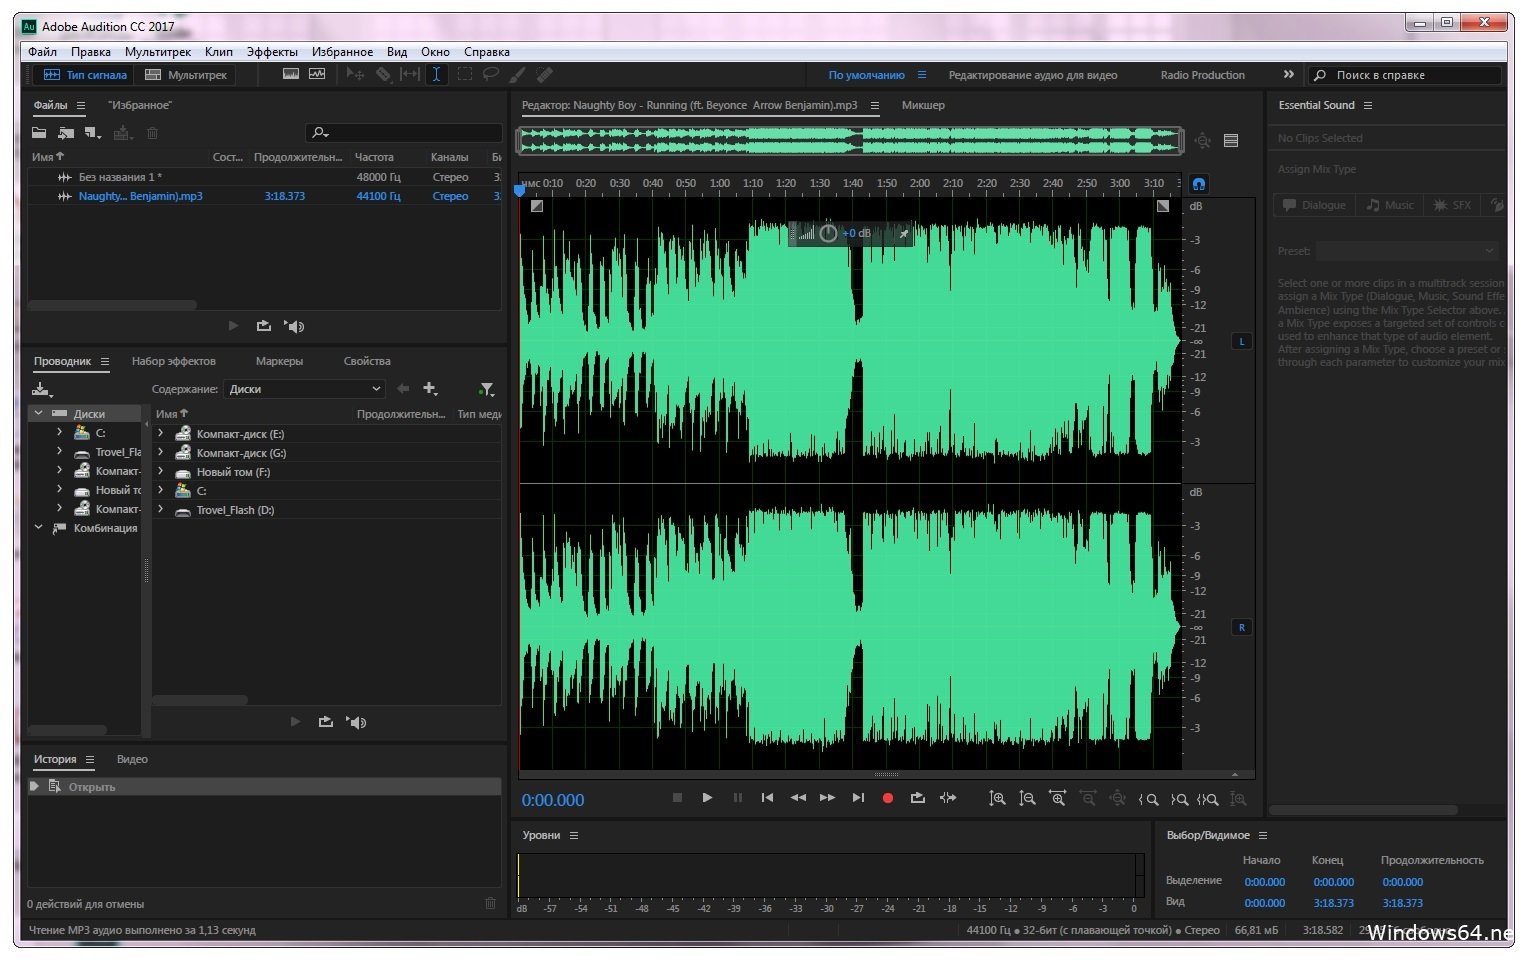 download the last version for android Adobe Audition 2023 v23.5.0.48